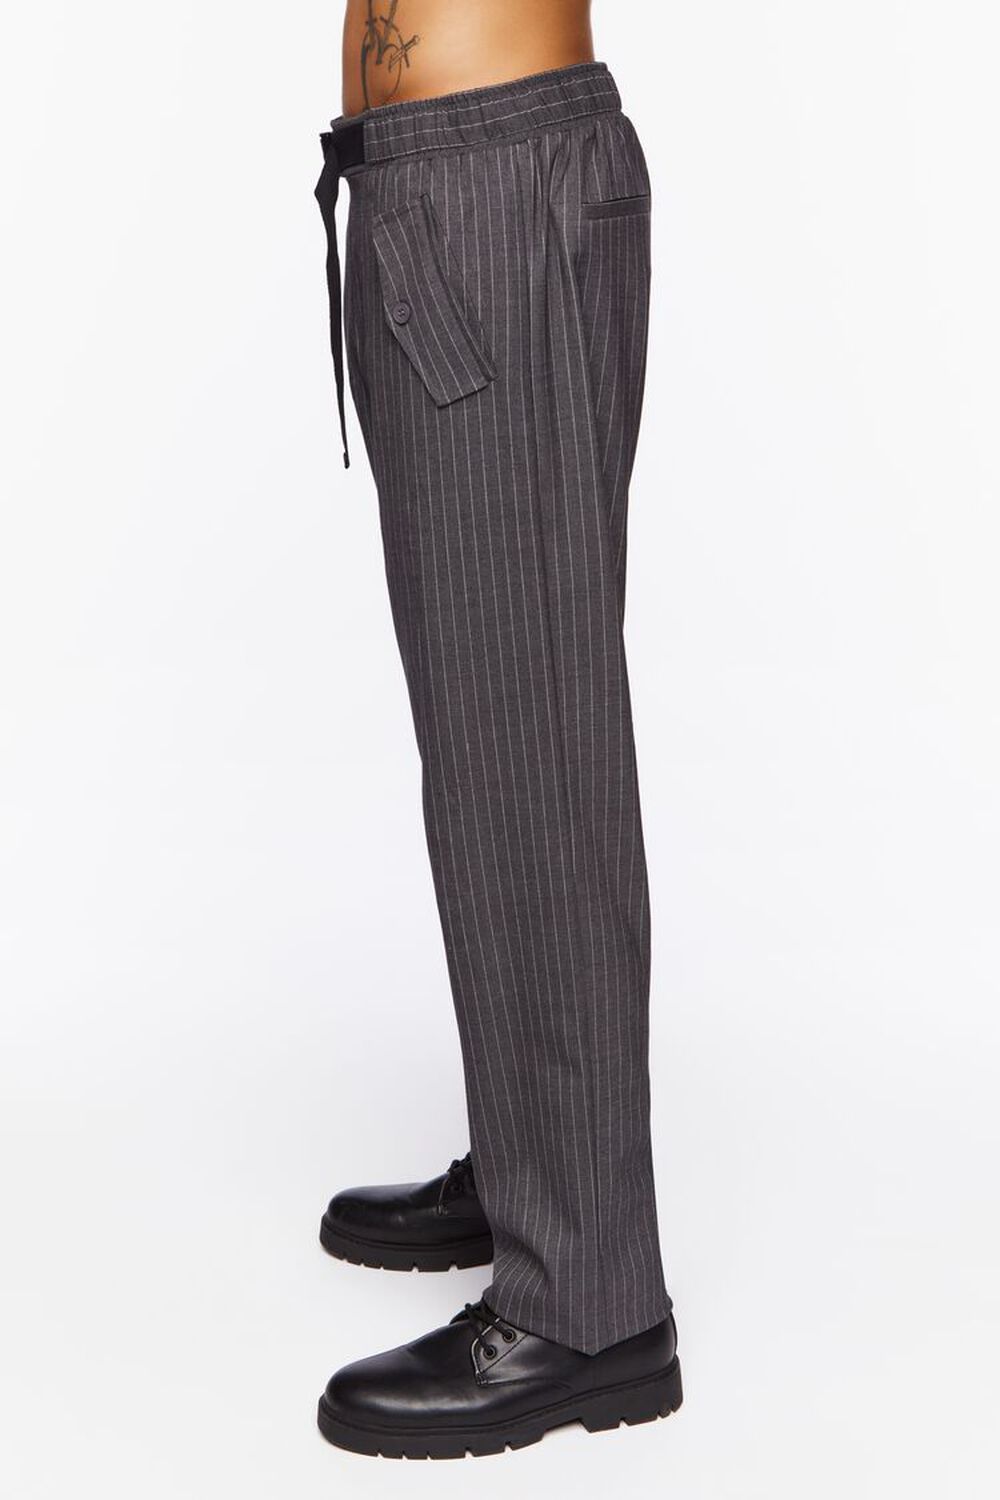 CHARCOAL/WHITE Pinstriped Belted Trousers, image 3